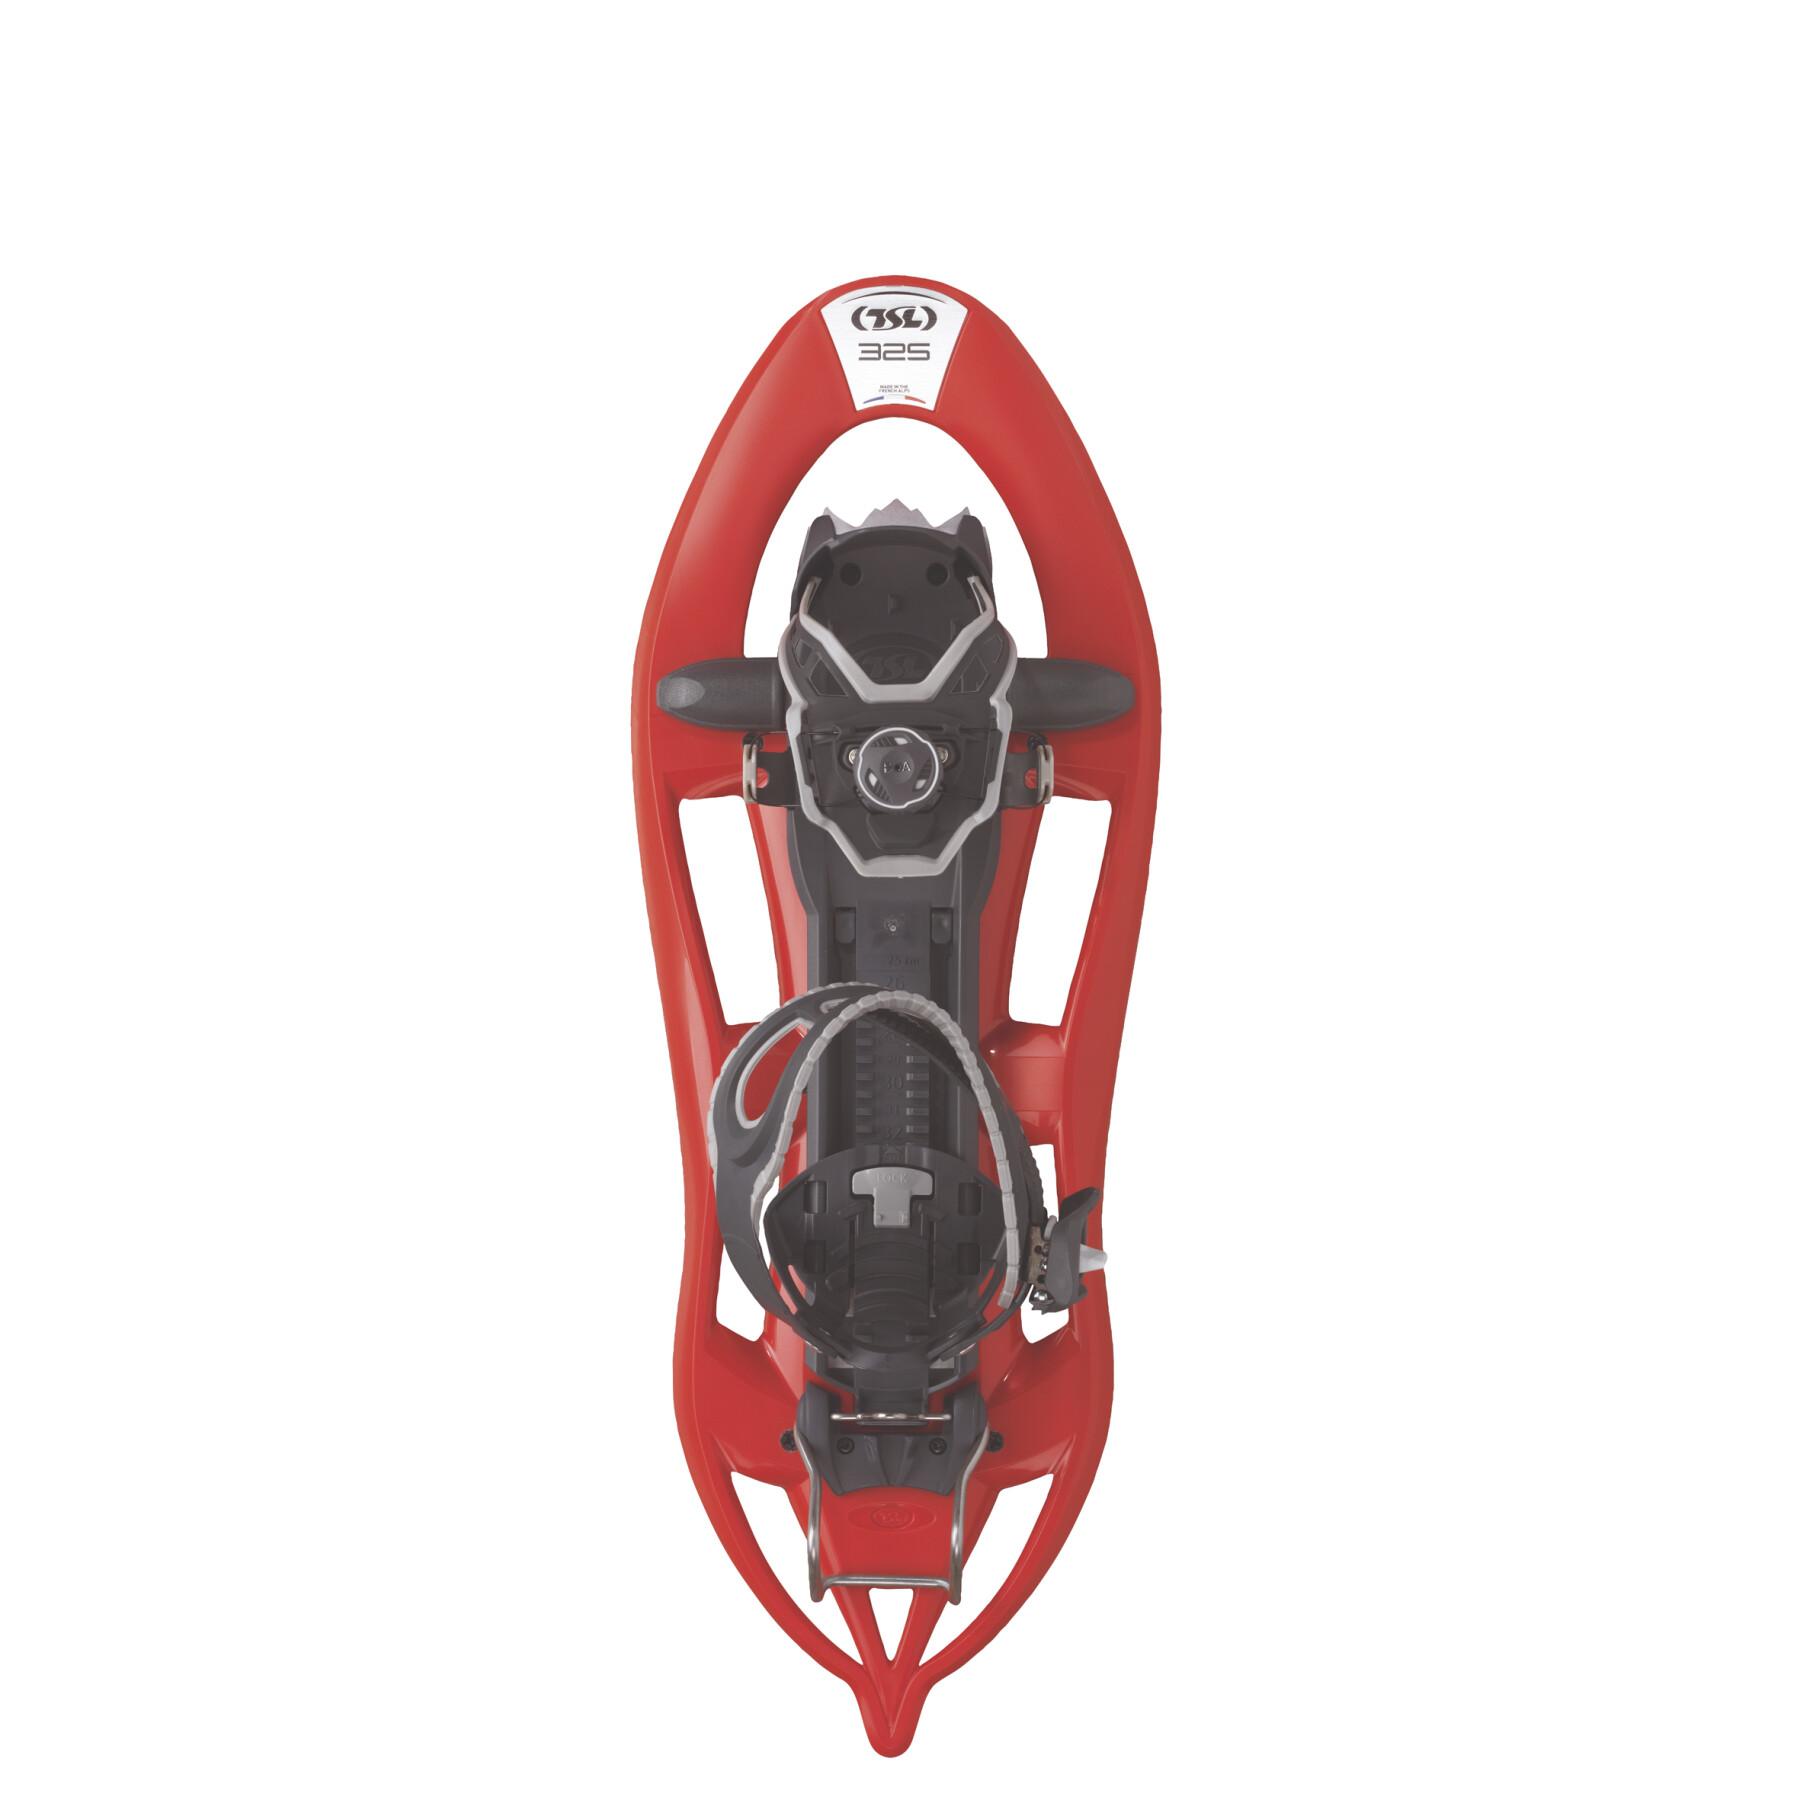 Snowshoes (size 39 to 47) TSL Rescue 325 Paprika Initial